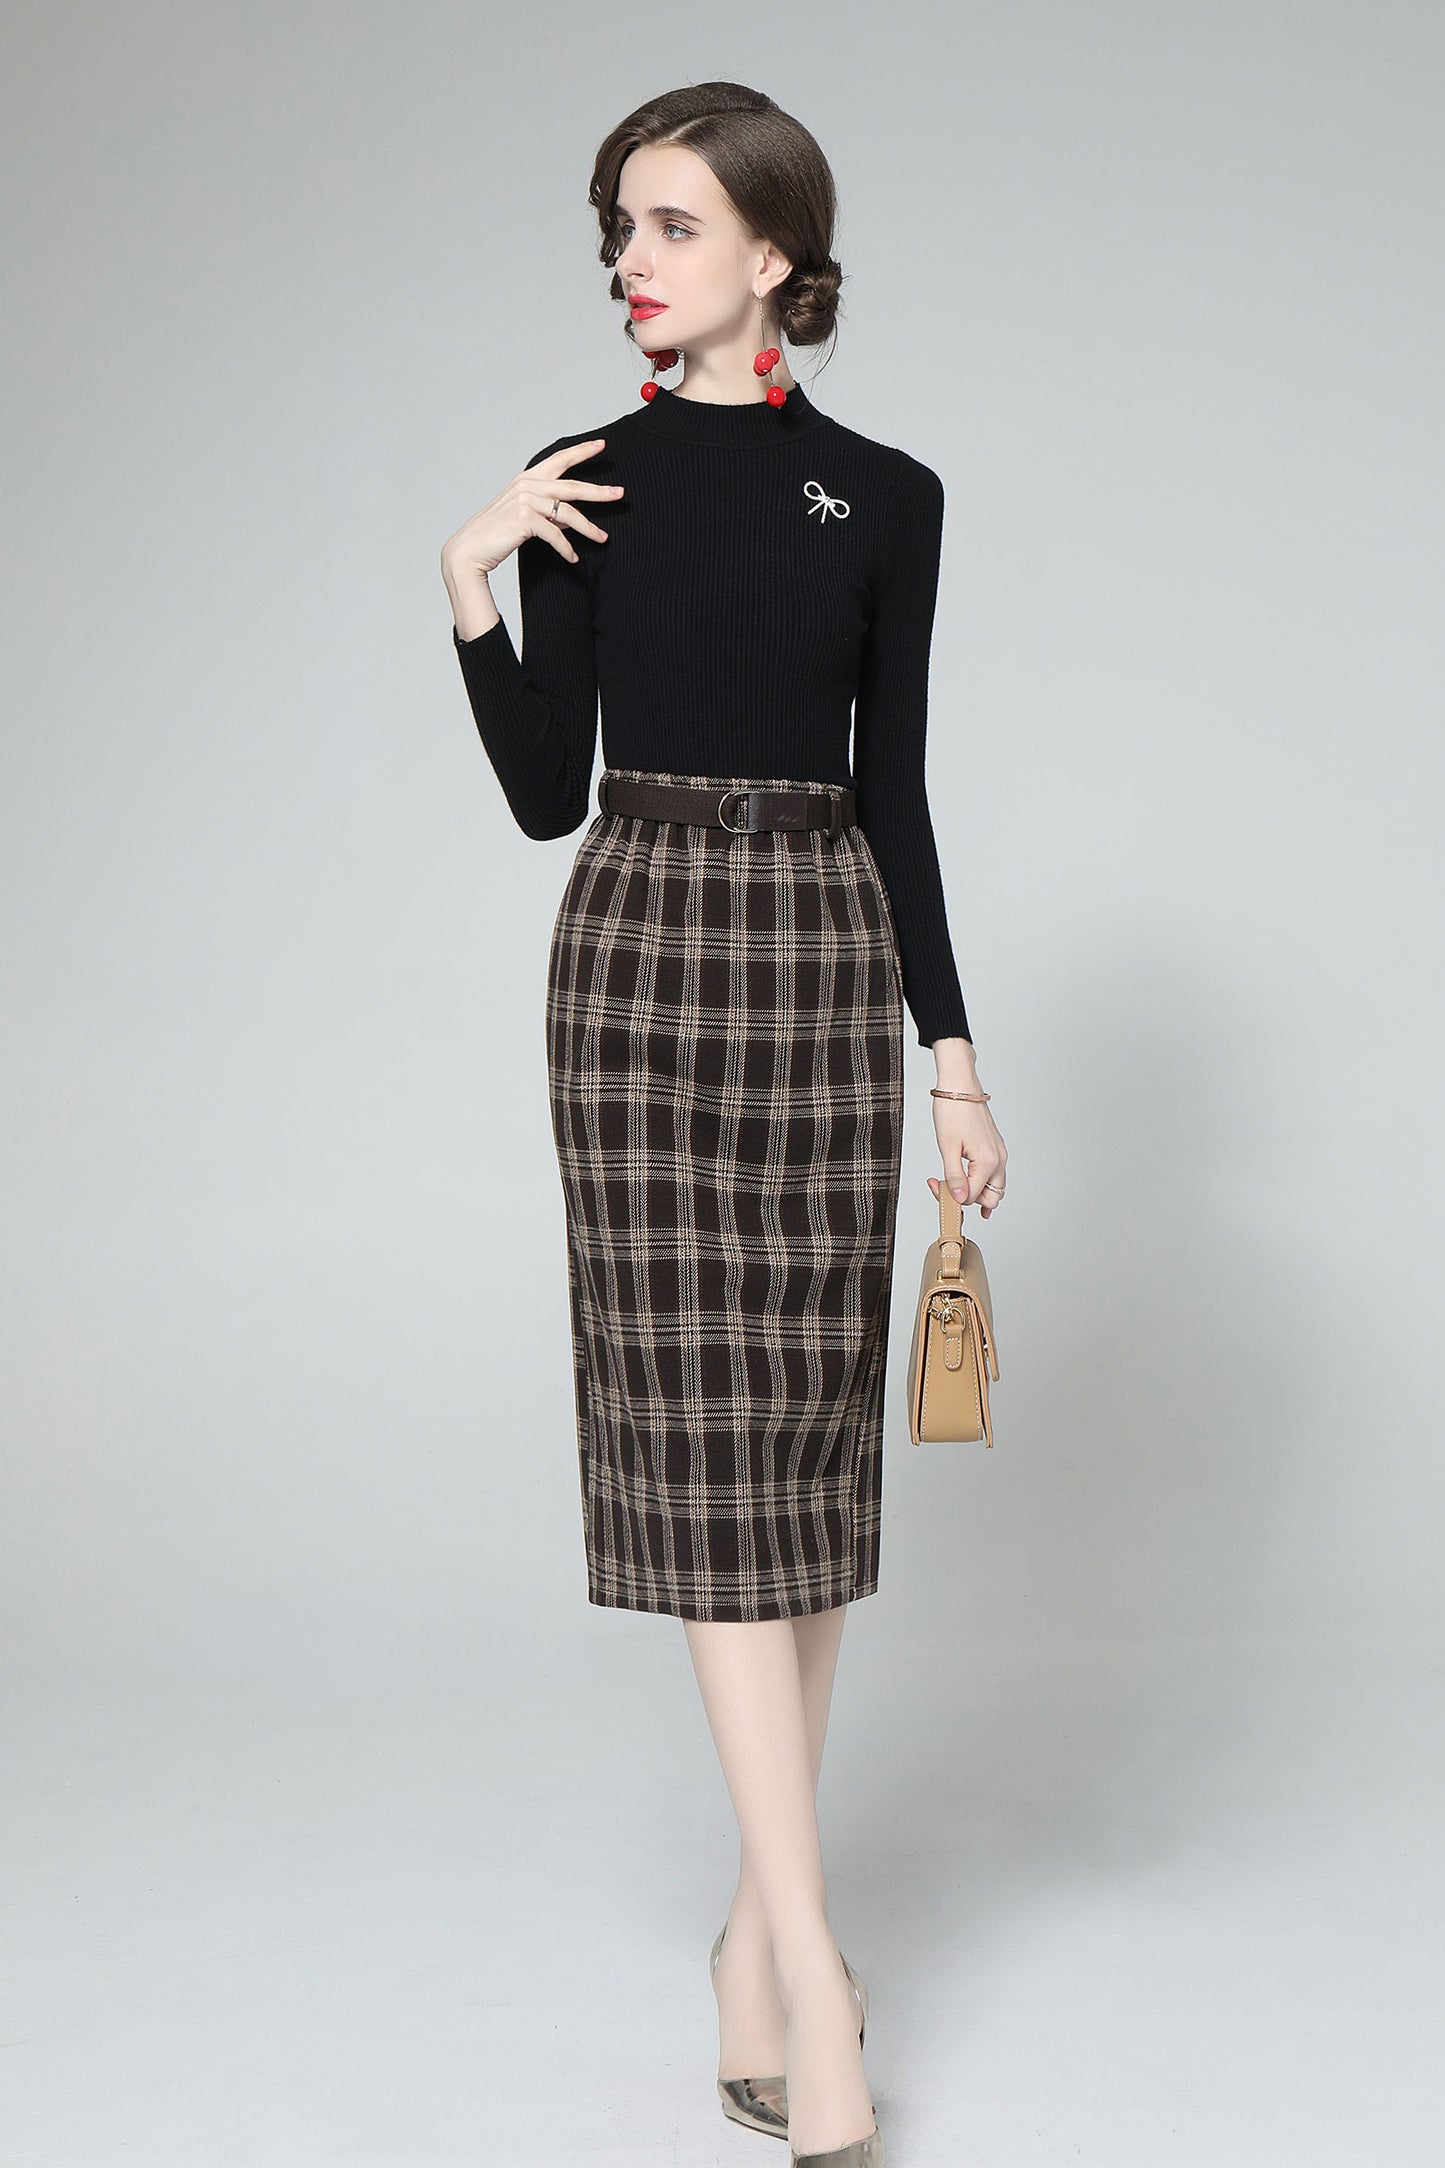 Rounded Collar Knit Top 2 in 1 Elegant A Line Midi Dress